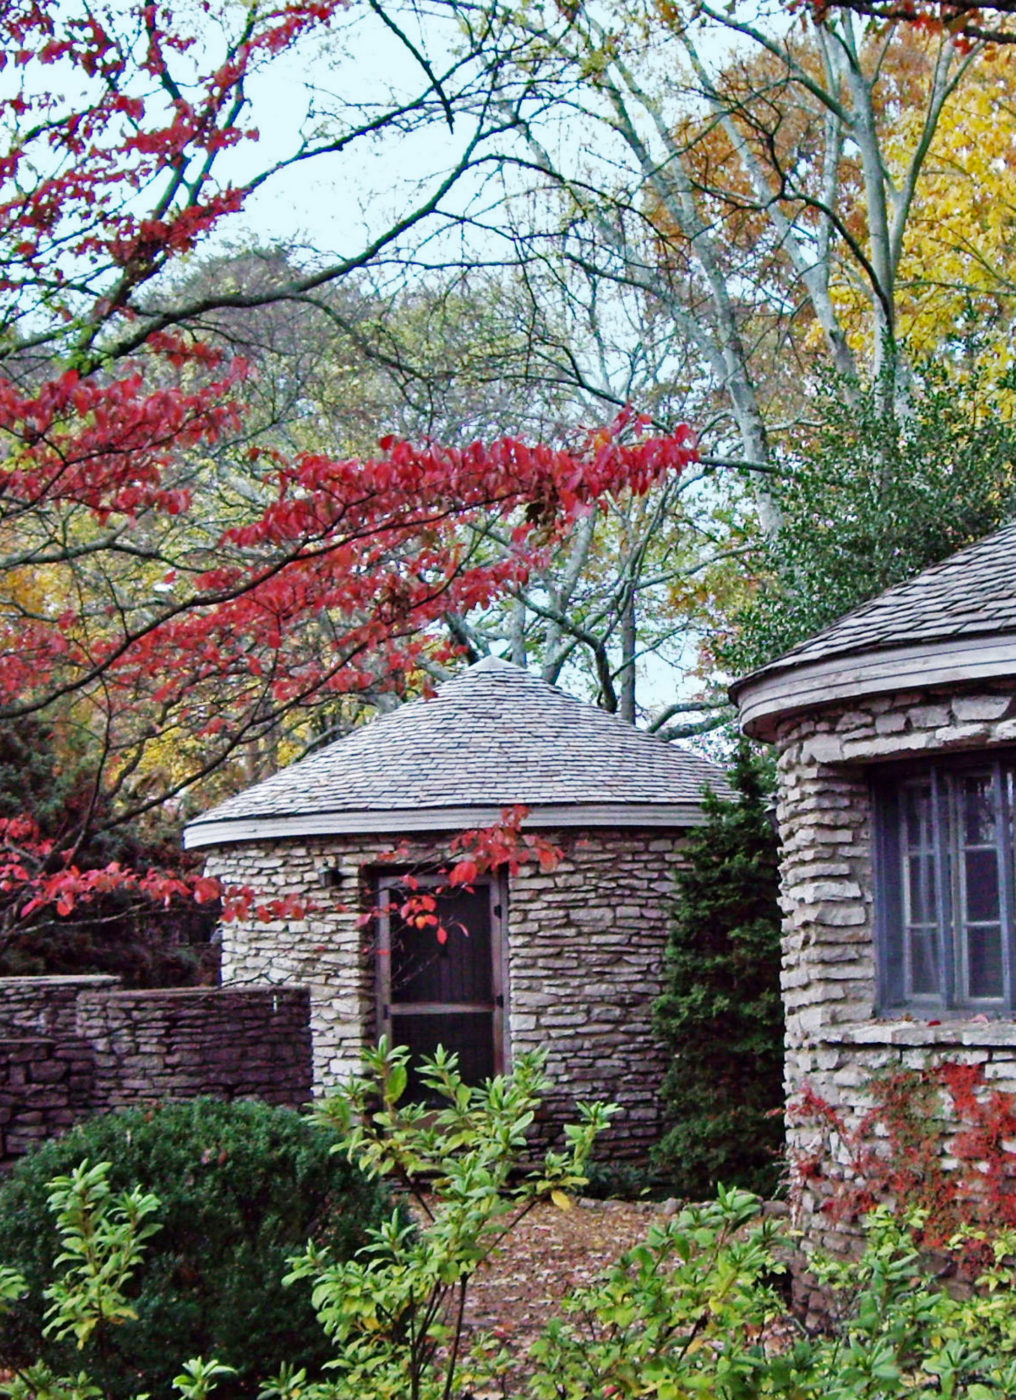 A photo shows the stone buildings at the arboretum surrounded by trees and bushes.